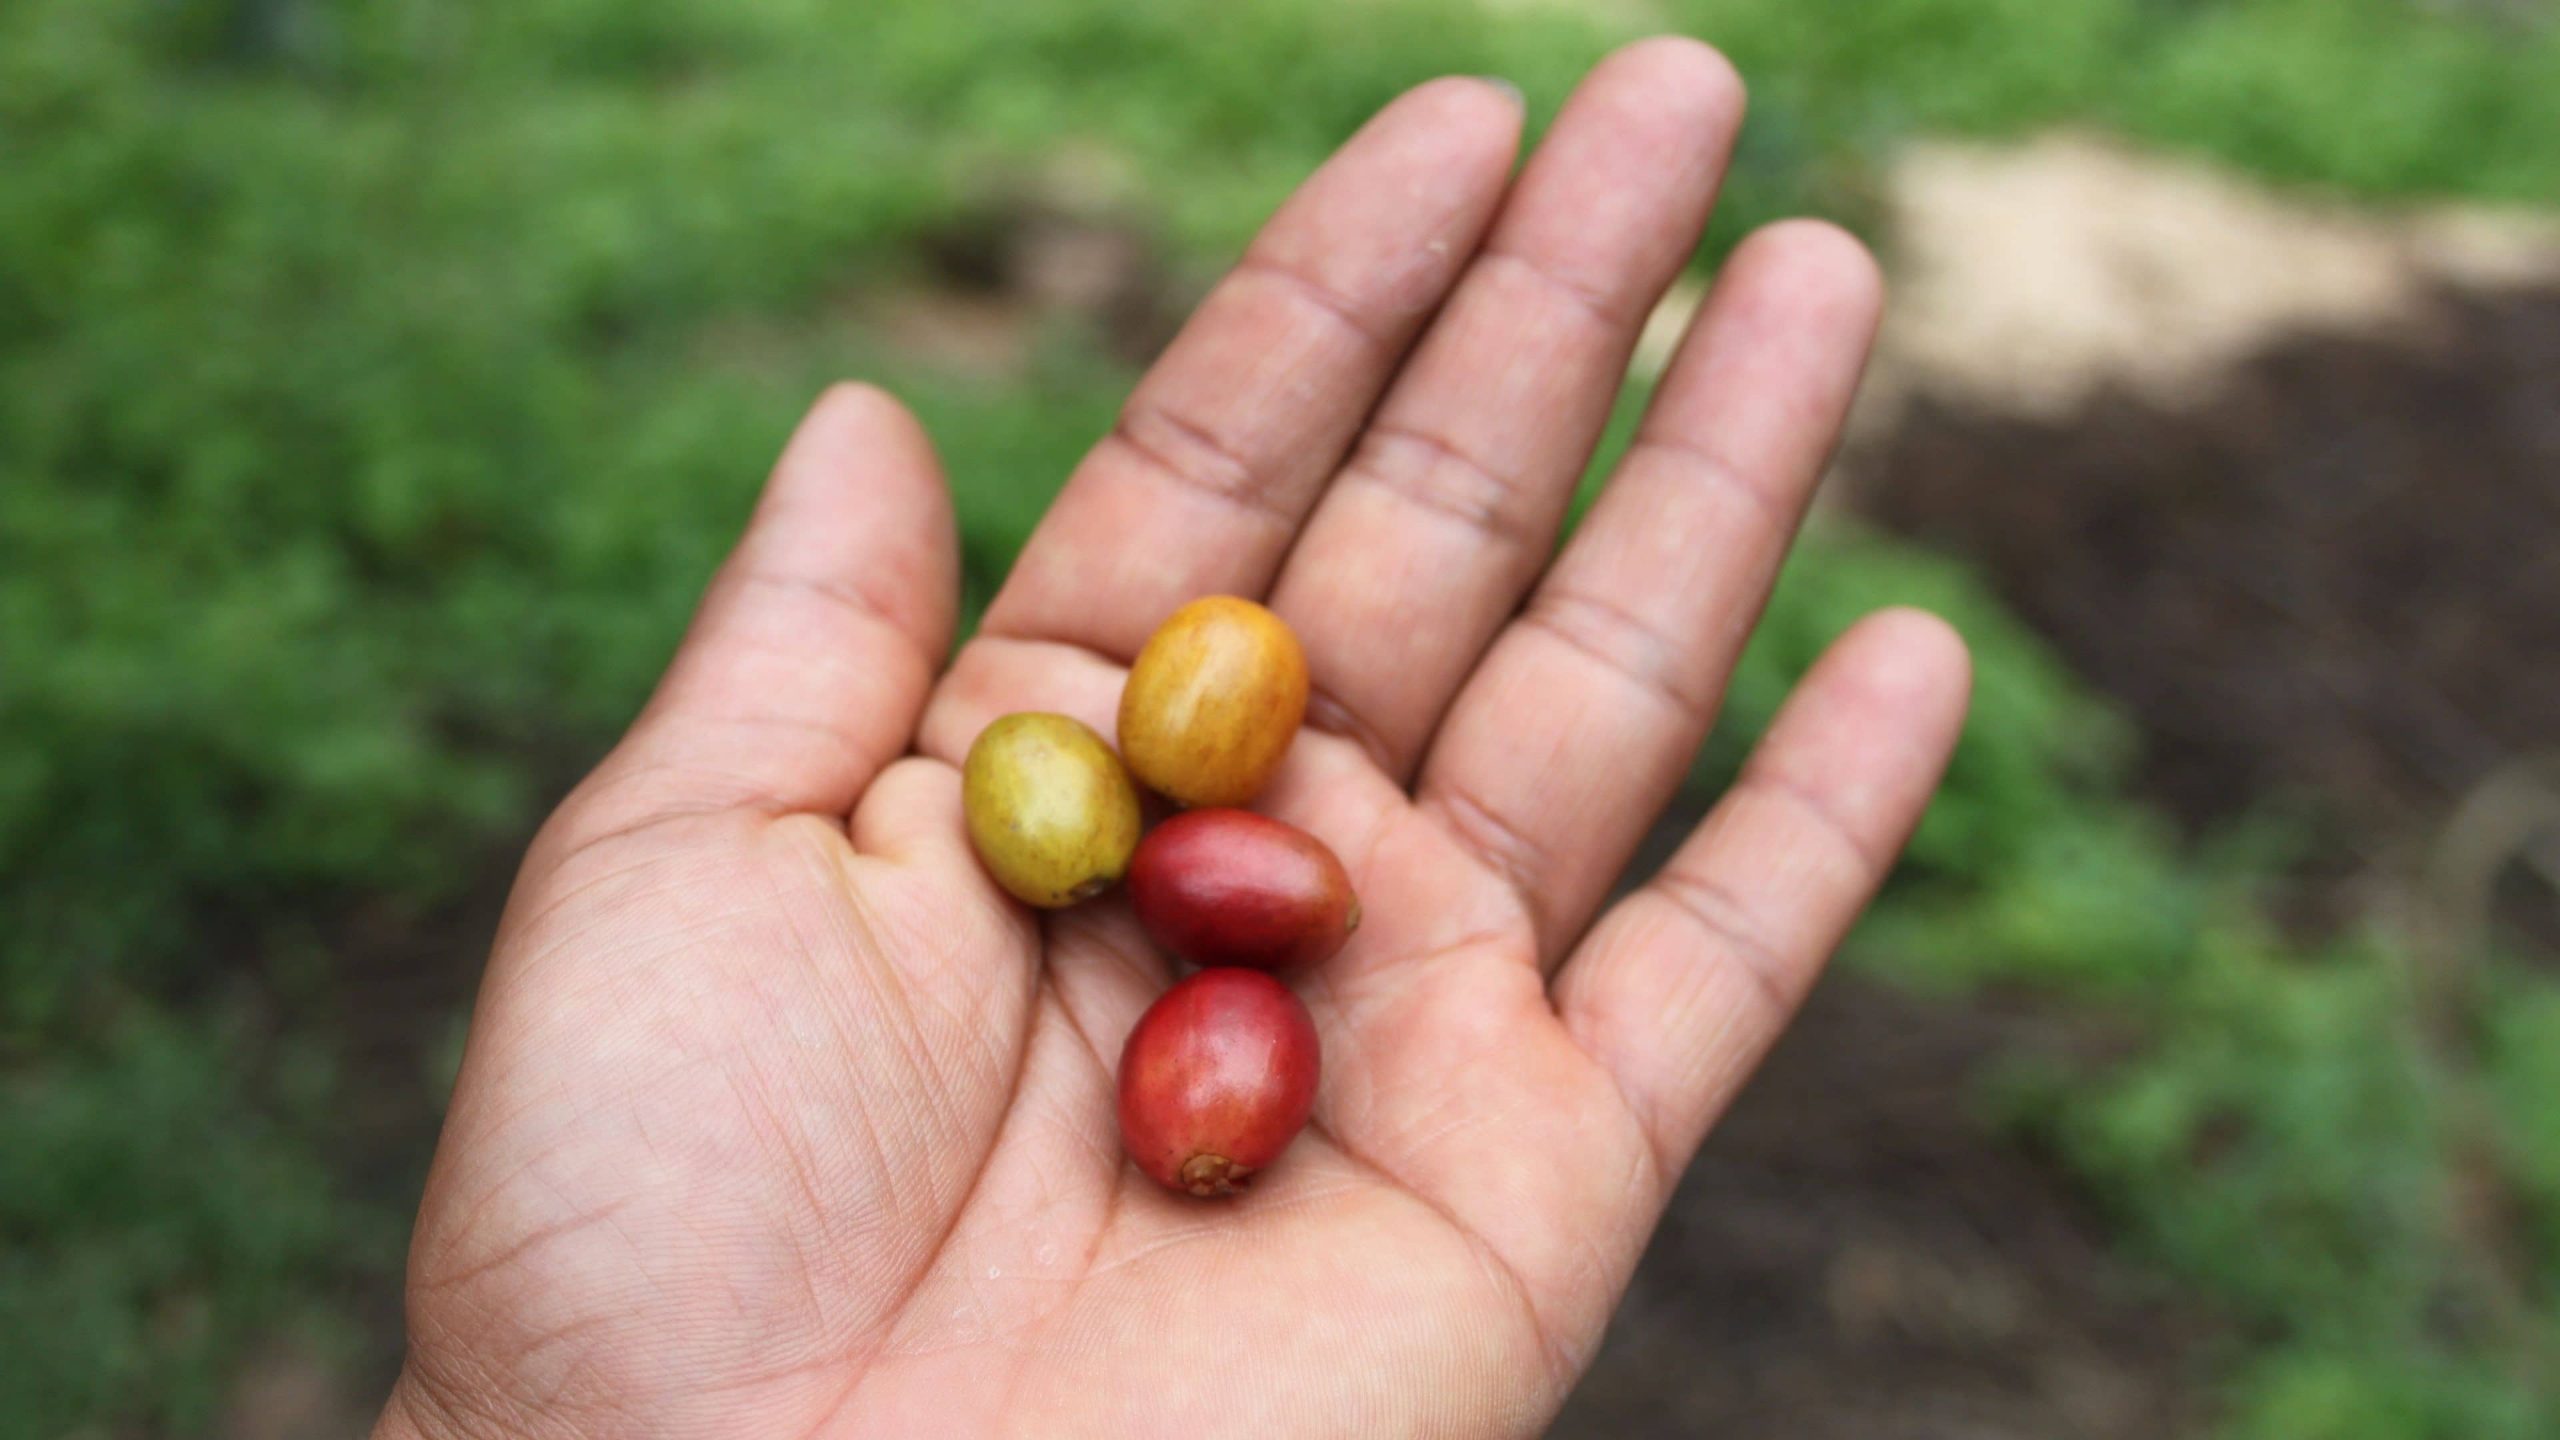 Coffee cherries in a hand